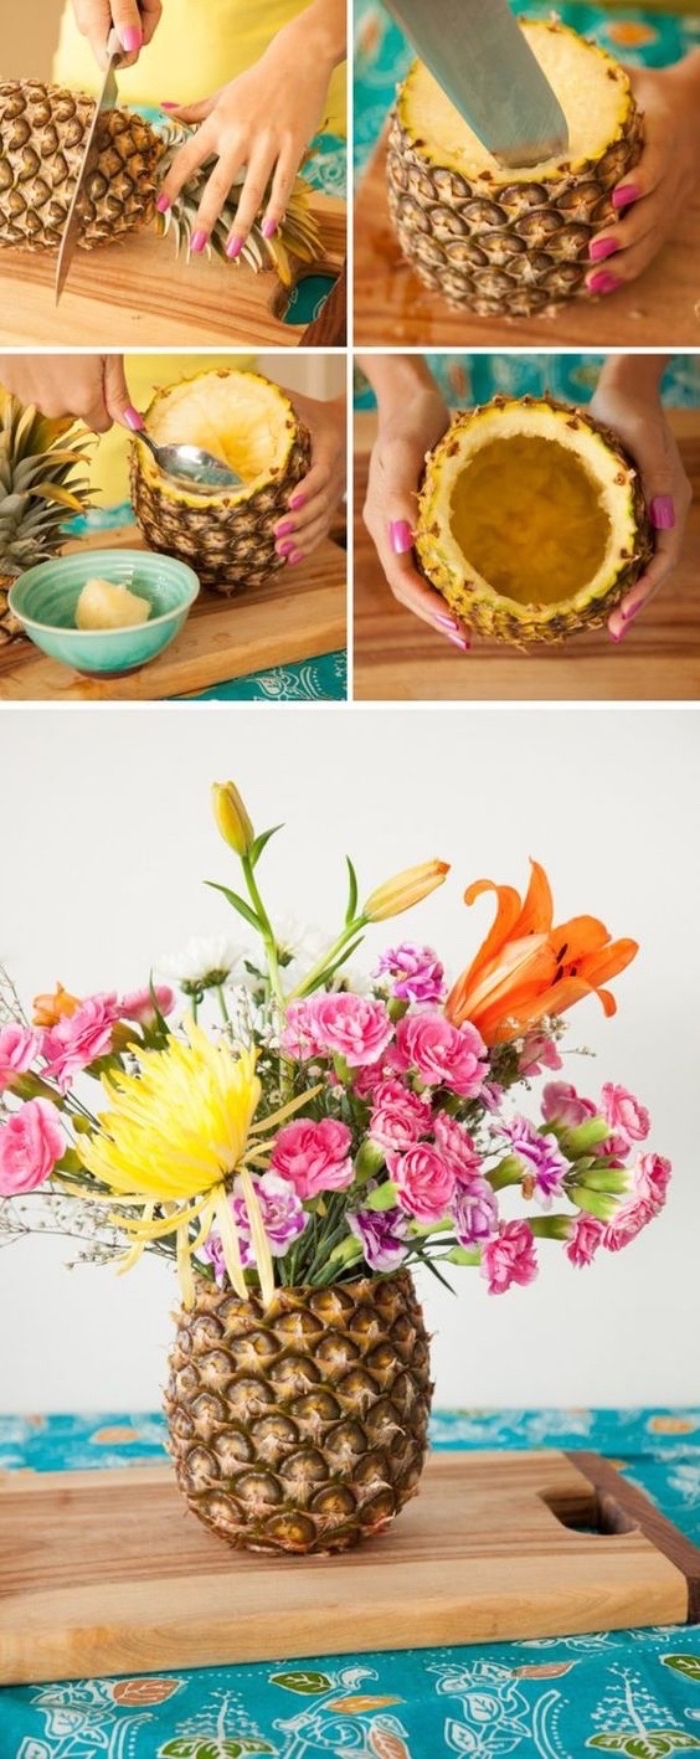 emptied pineapple, used as a vase, crafts to do when bored, colourful flower bouquet